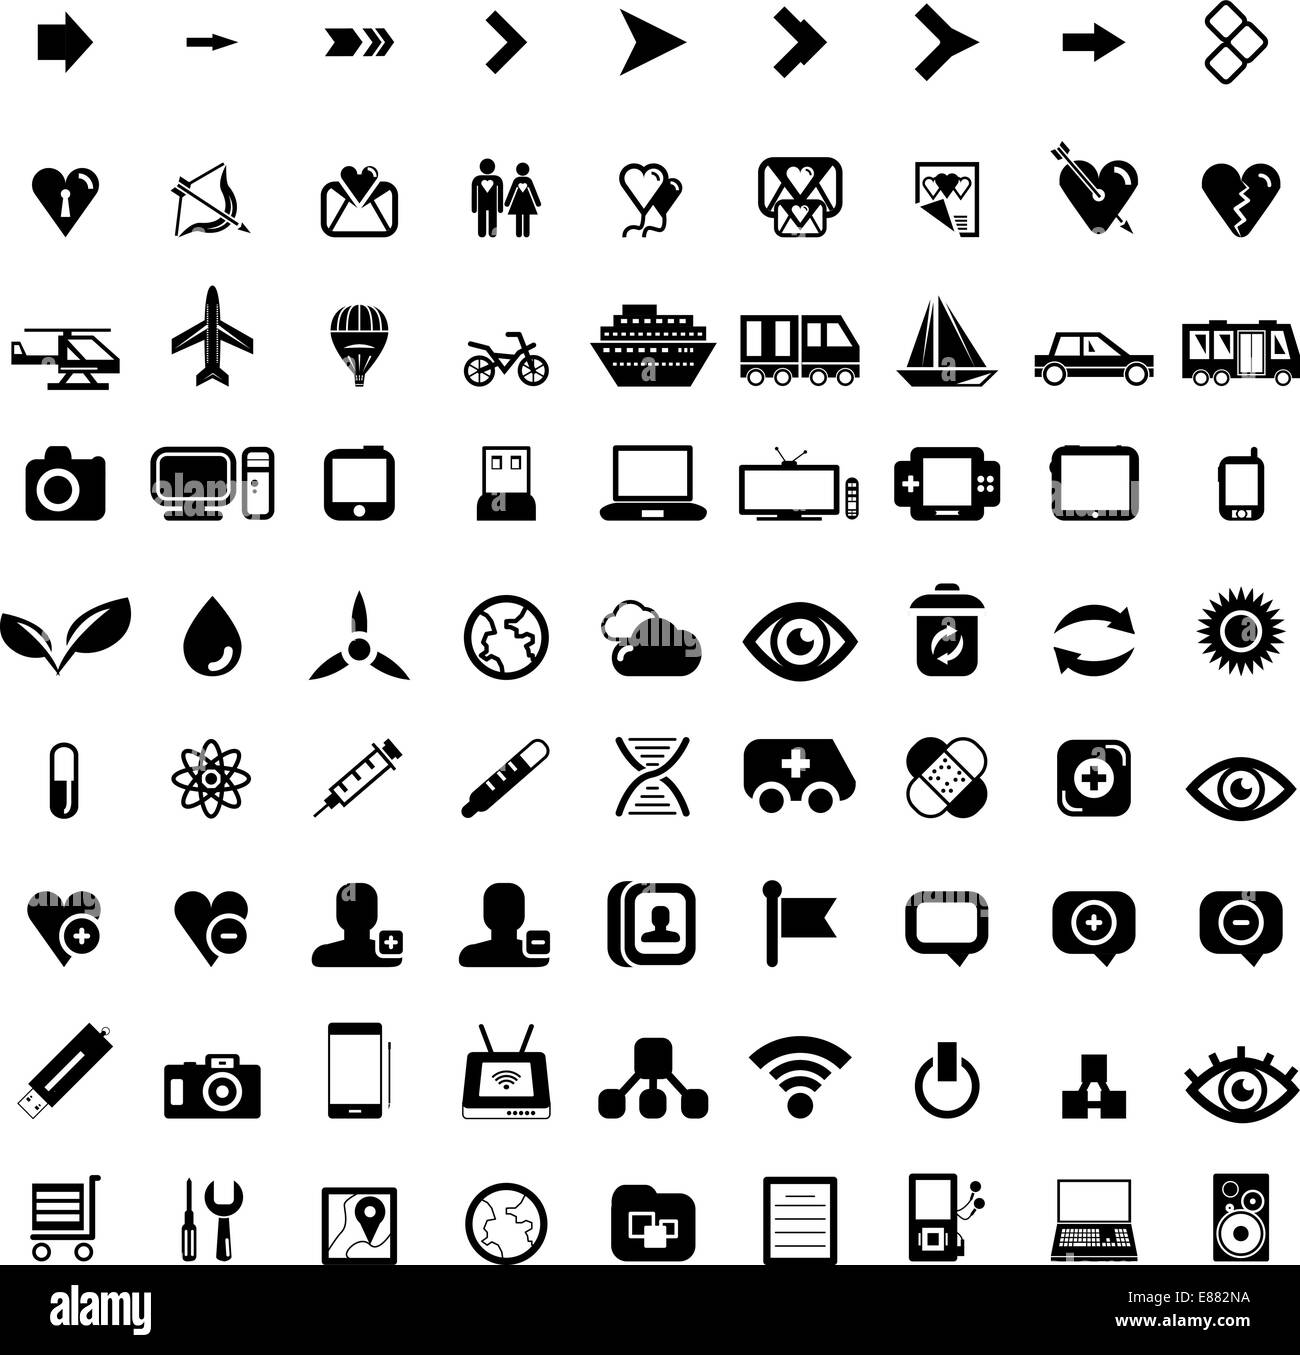 Big set of black web icons isolated on white. Vector Stock Vector